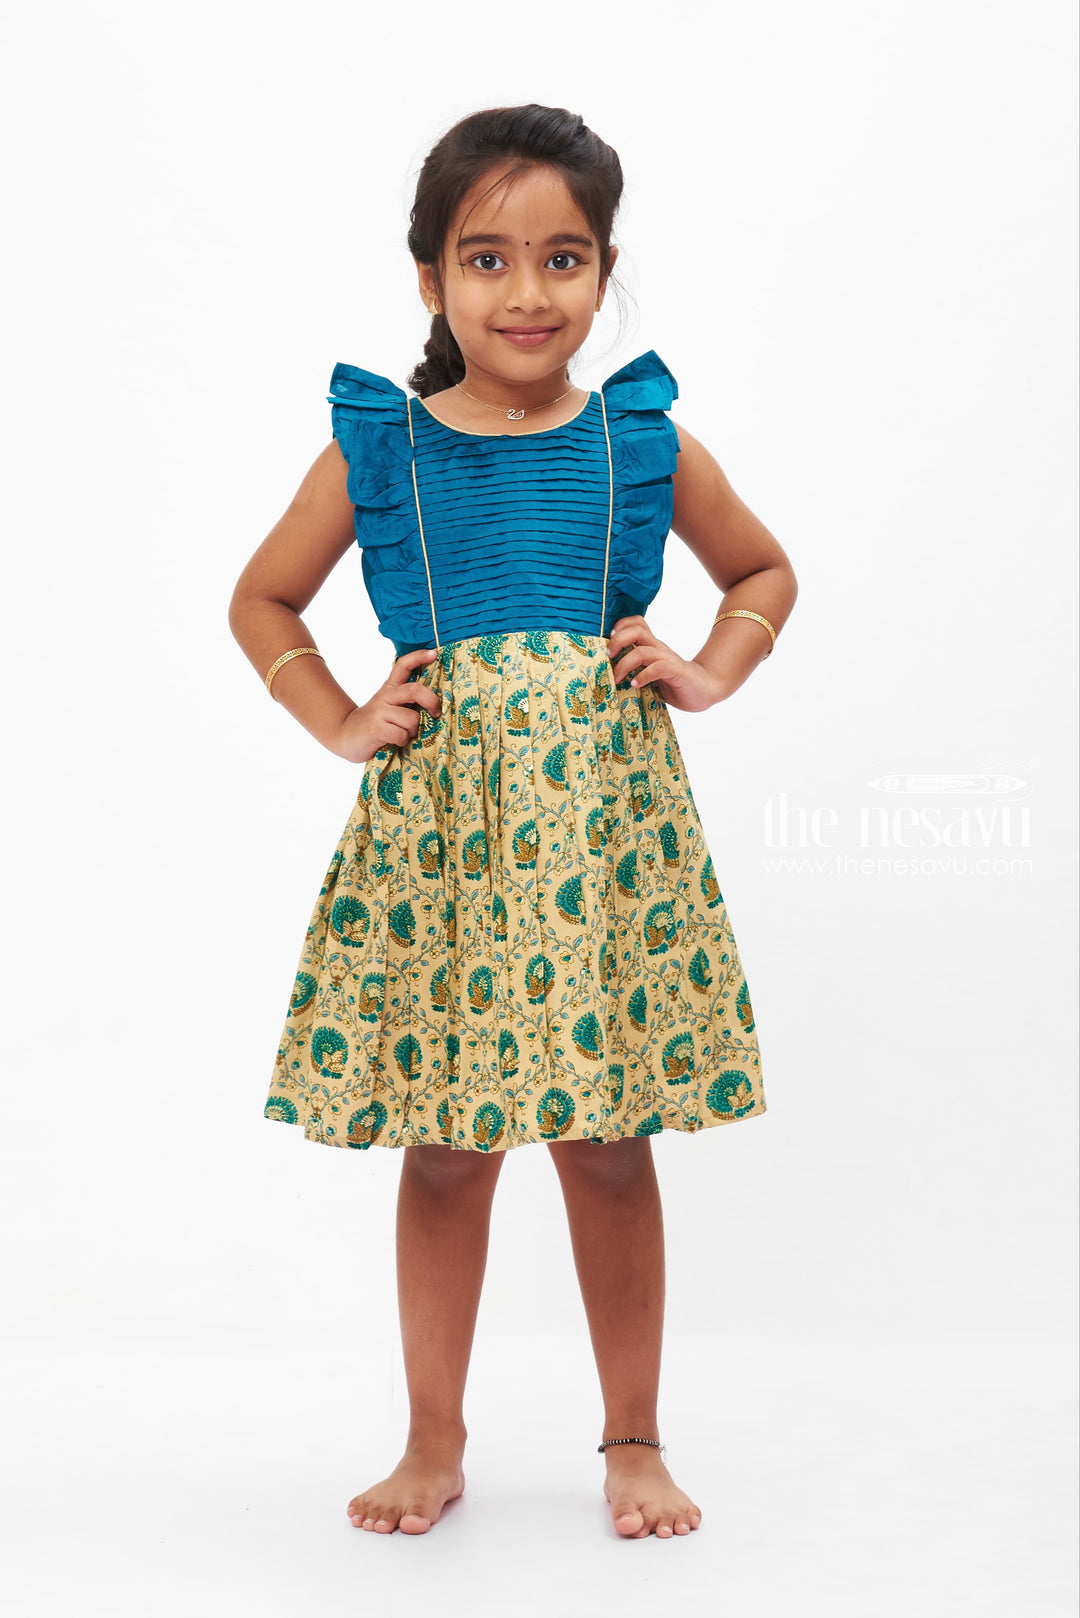 The Nesavu Baby Cotton Frocks Teal Blue and Beige Traditional Peacock Printed Baby Frock for Girls Nesavu 16 (1Y) / Blue BFJ510A-16 Girls Teal Peacock Print Festive Dress | Baby Frock for little Girls | The Nesavu